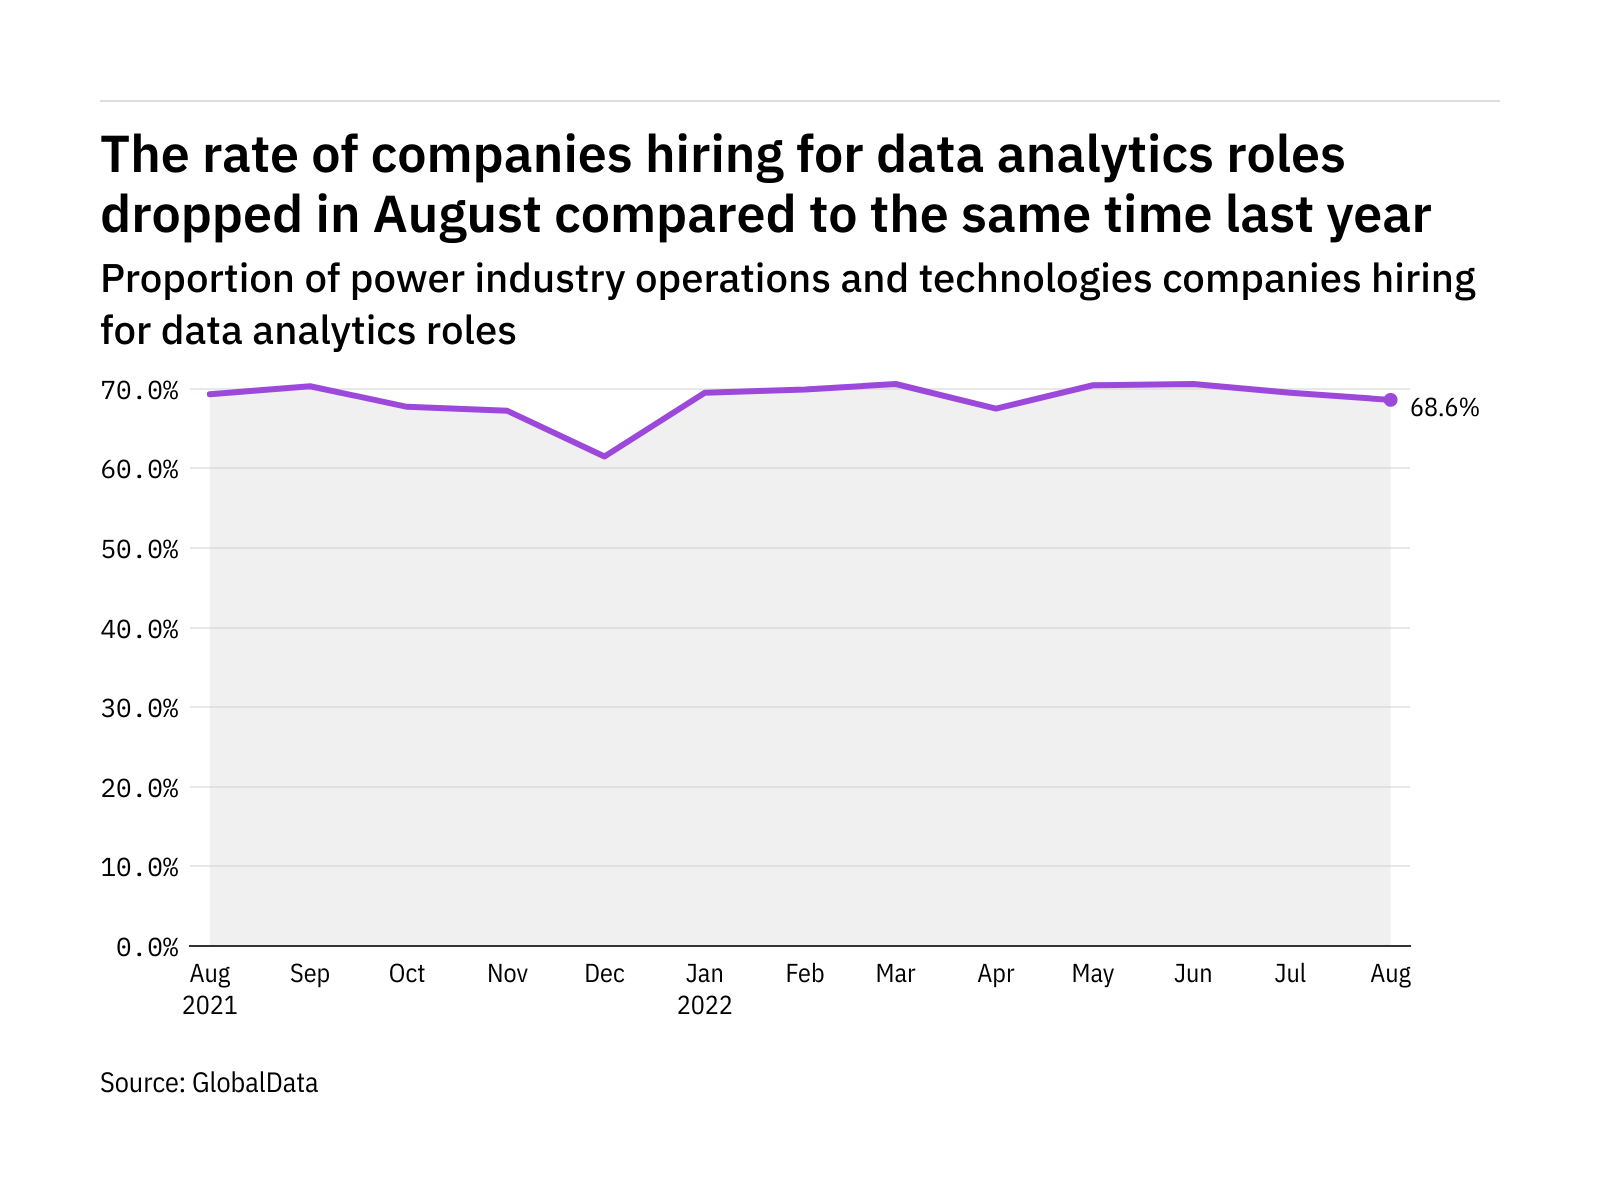 Data analytics hiring levels in the power industry dropped in August 2022 - Power Technology